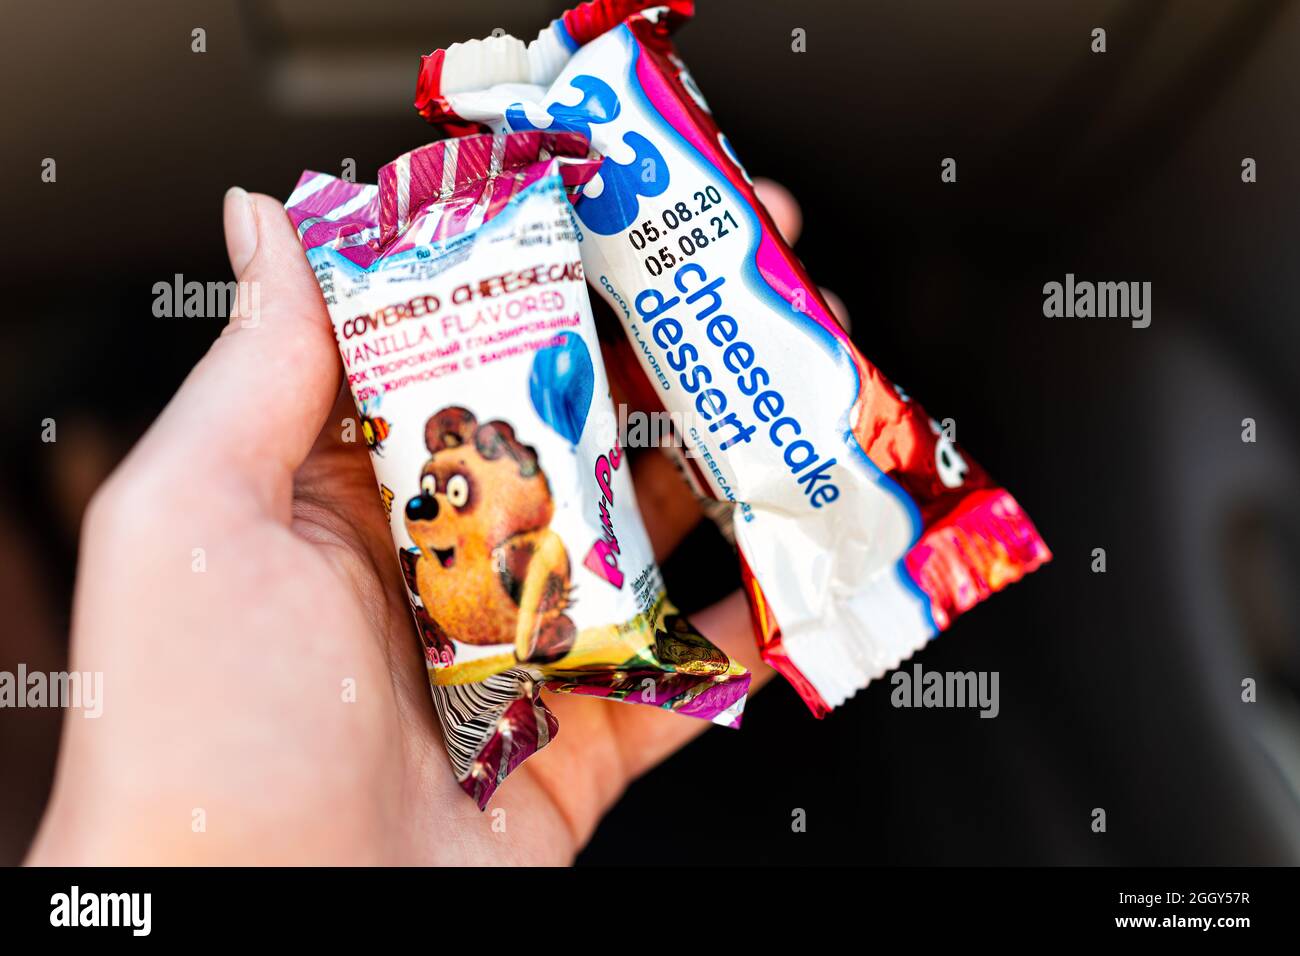 Miami, USA - January 19, 2021: Storebought Russian delicious cheesecake bars coated in chocolate with chocolate and vanilla packaged in hand from Russ Stock Photo